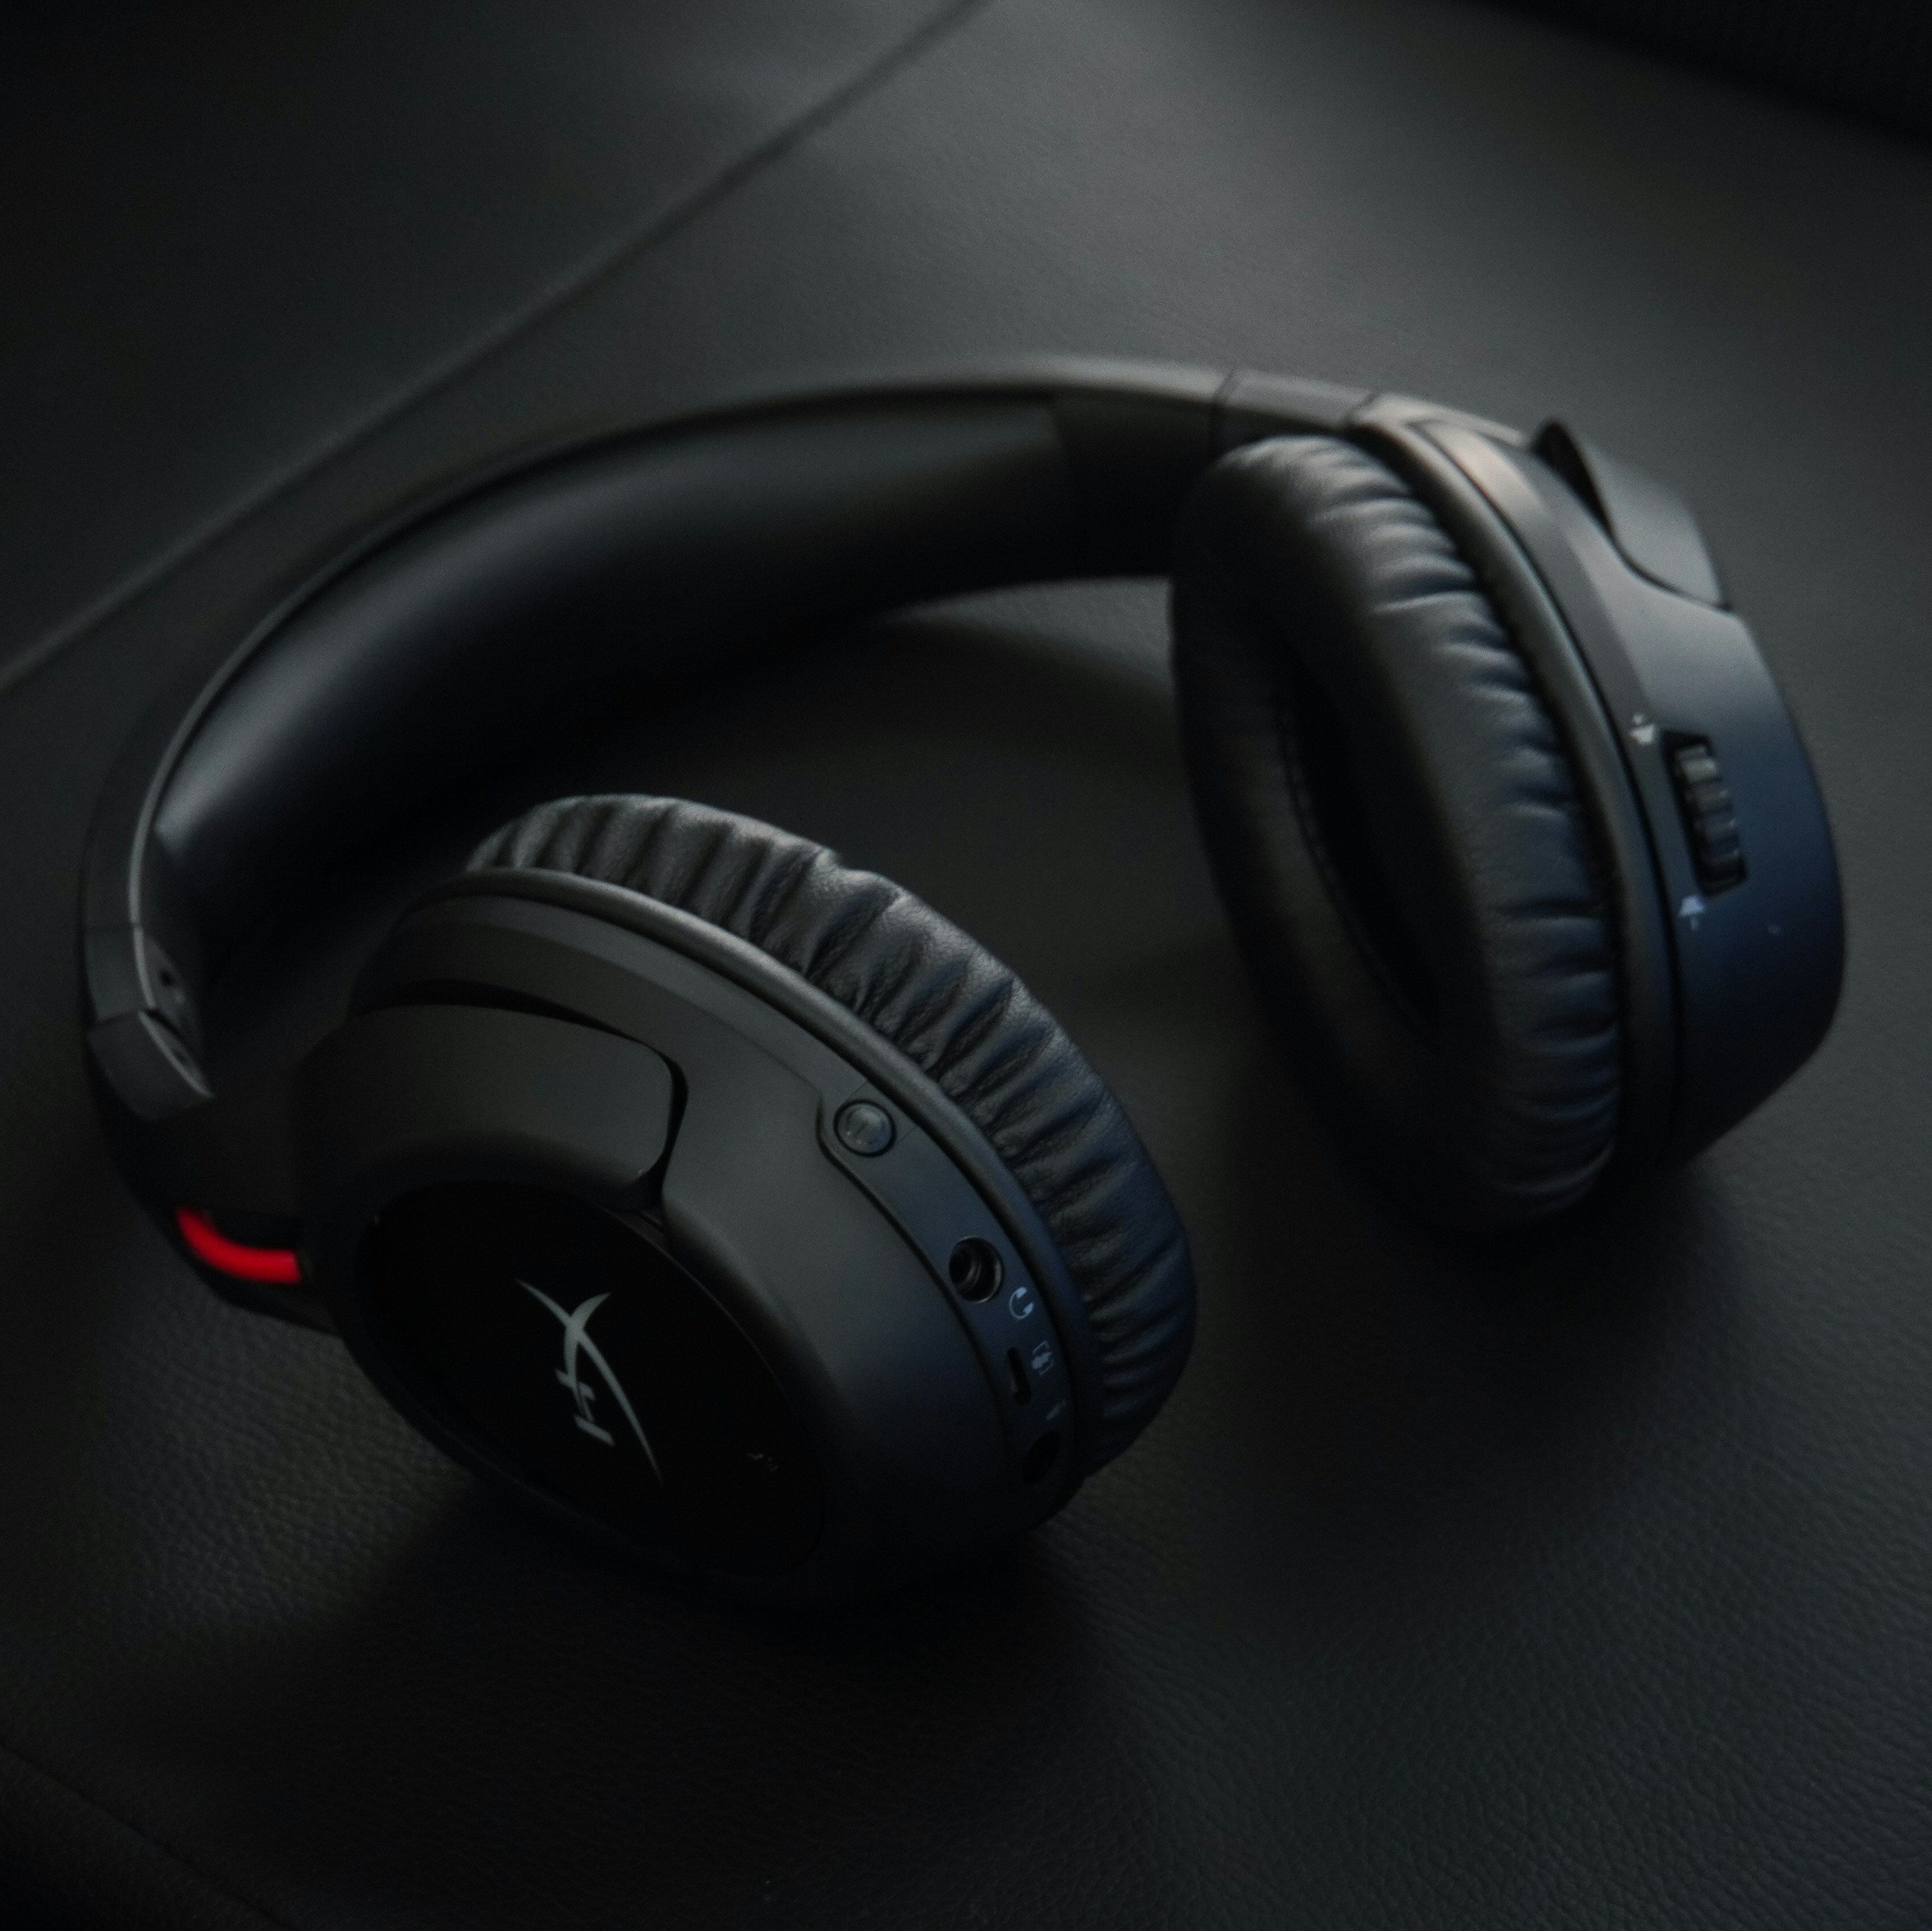 Escape the limits of cable connections and roam free with the wireless HyperX Cloud Flight™. With a solid, gaming-grade wireless connection, incredible 30-hour battery life, and signature HyperX comfort, Cloud Flight allows you to play uninterrupted for longer.